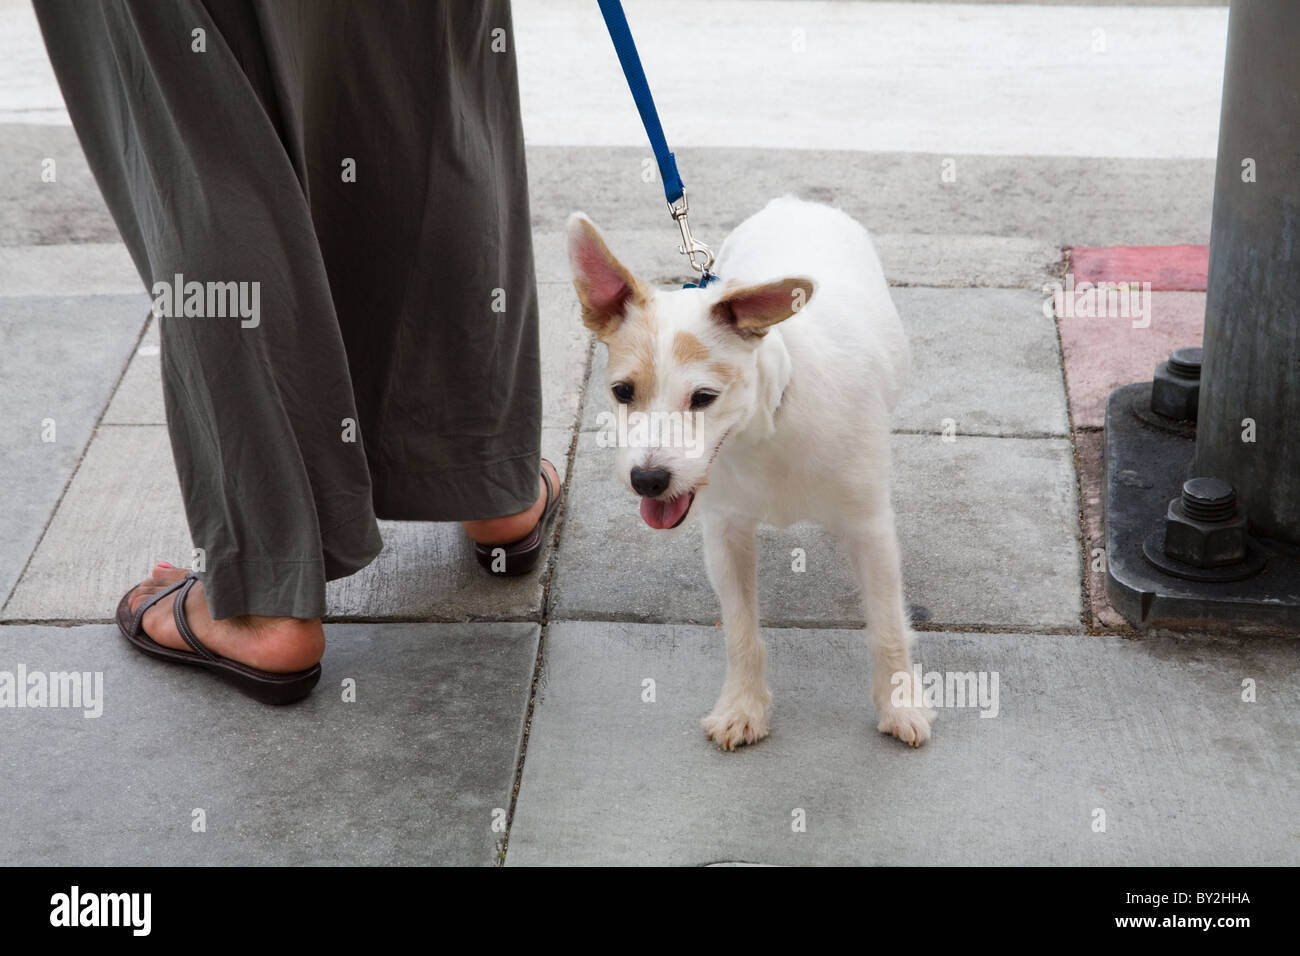 A Jack Russell terrier and owner waiting to cross the street Stock Photo